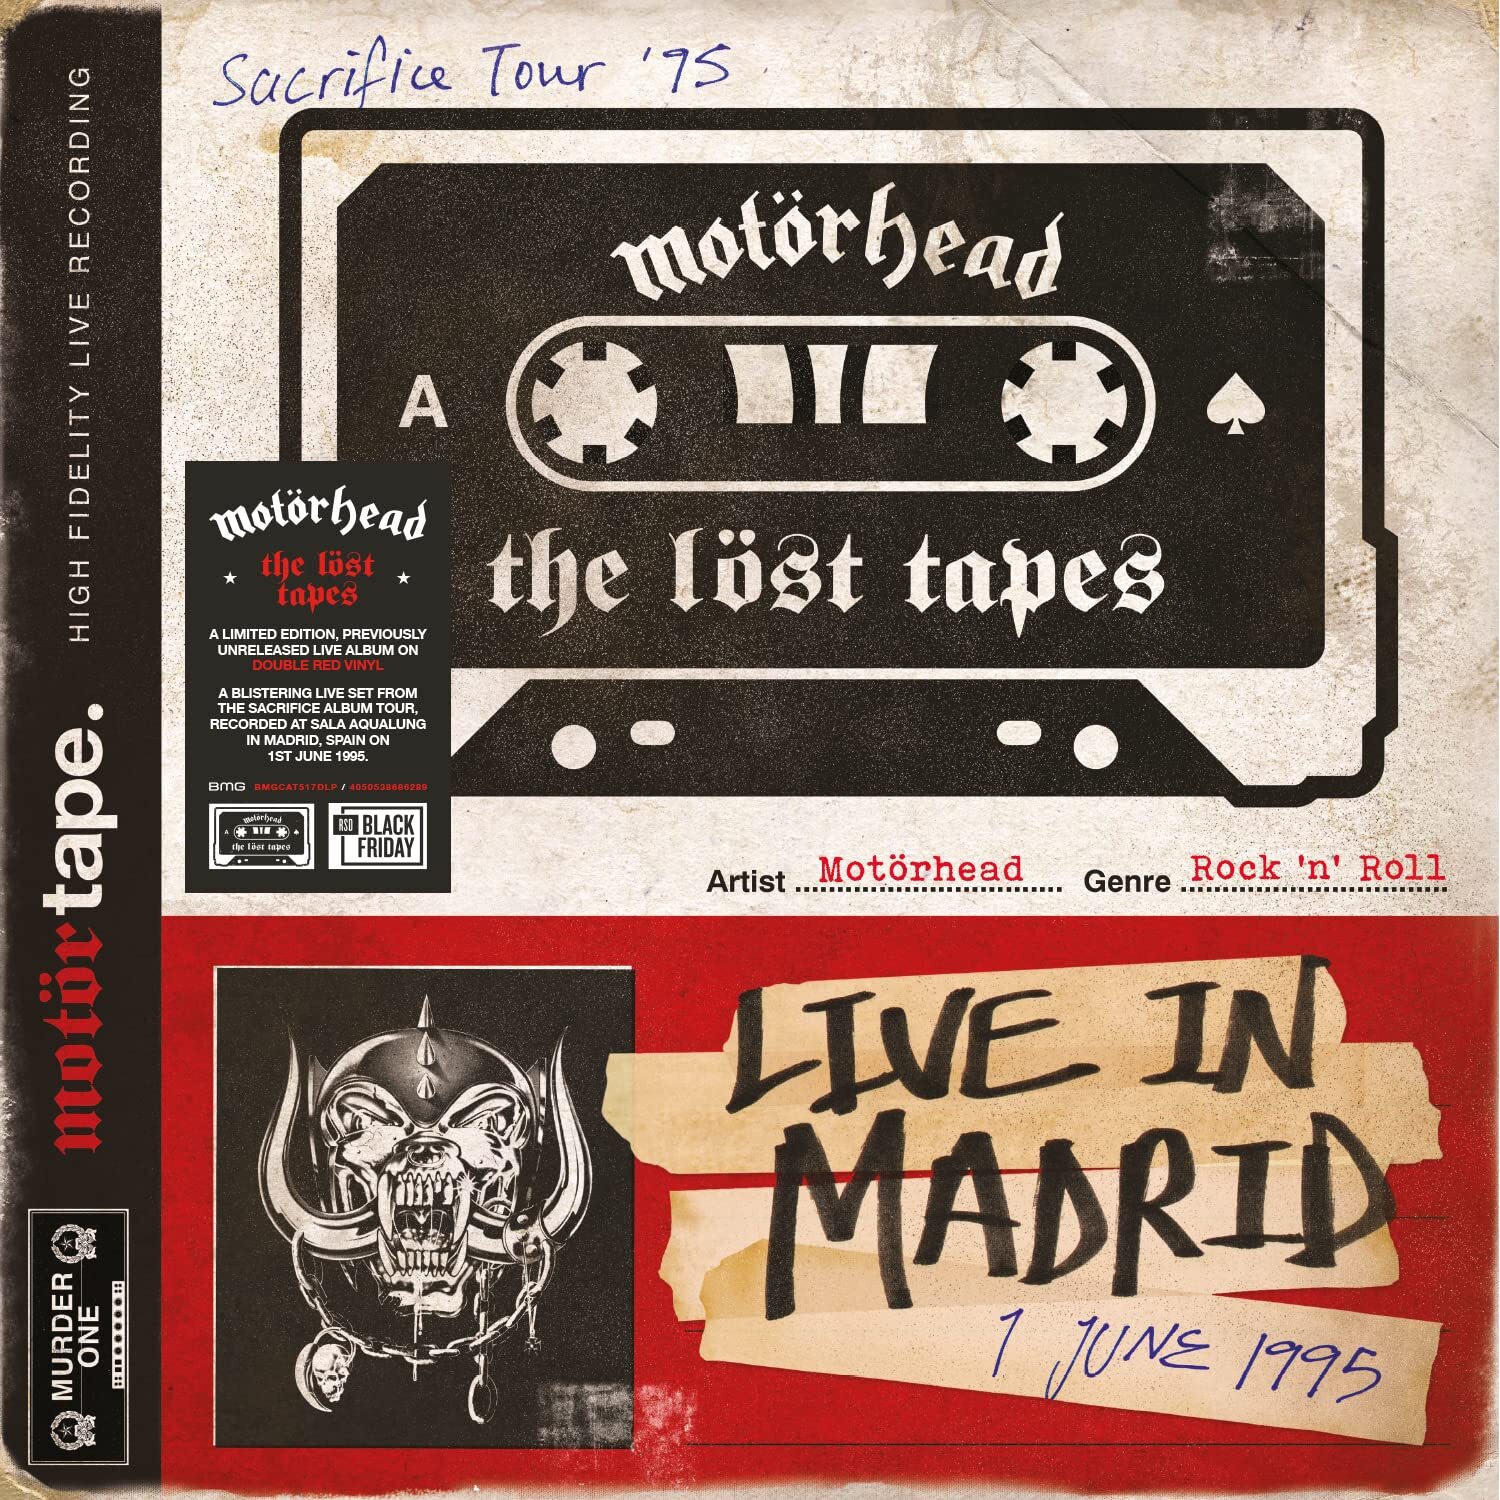 Рок Warner Music Motorhead - The Lost Tapes Vol. 1 Live In Madrid 1 June 1995 (Limited Edition Coloured Vinyl 2LP) рок warner music motorhead the lost tapes vol 1 live in madrid 1 june 1995 limited edition coloured vinyl 2lp